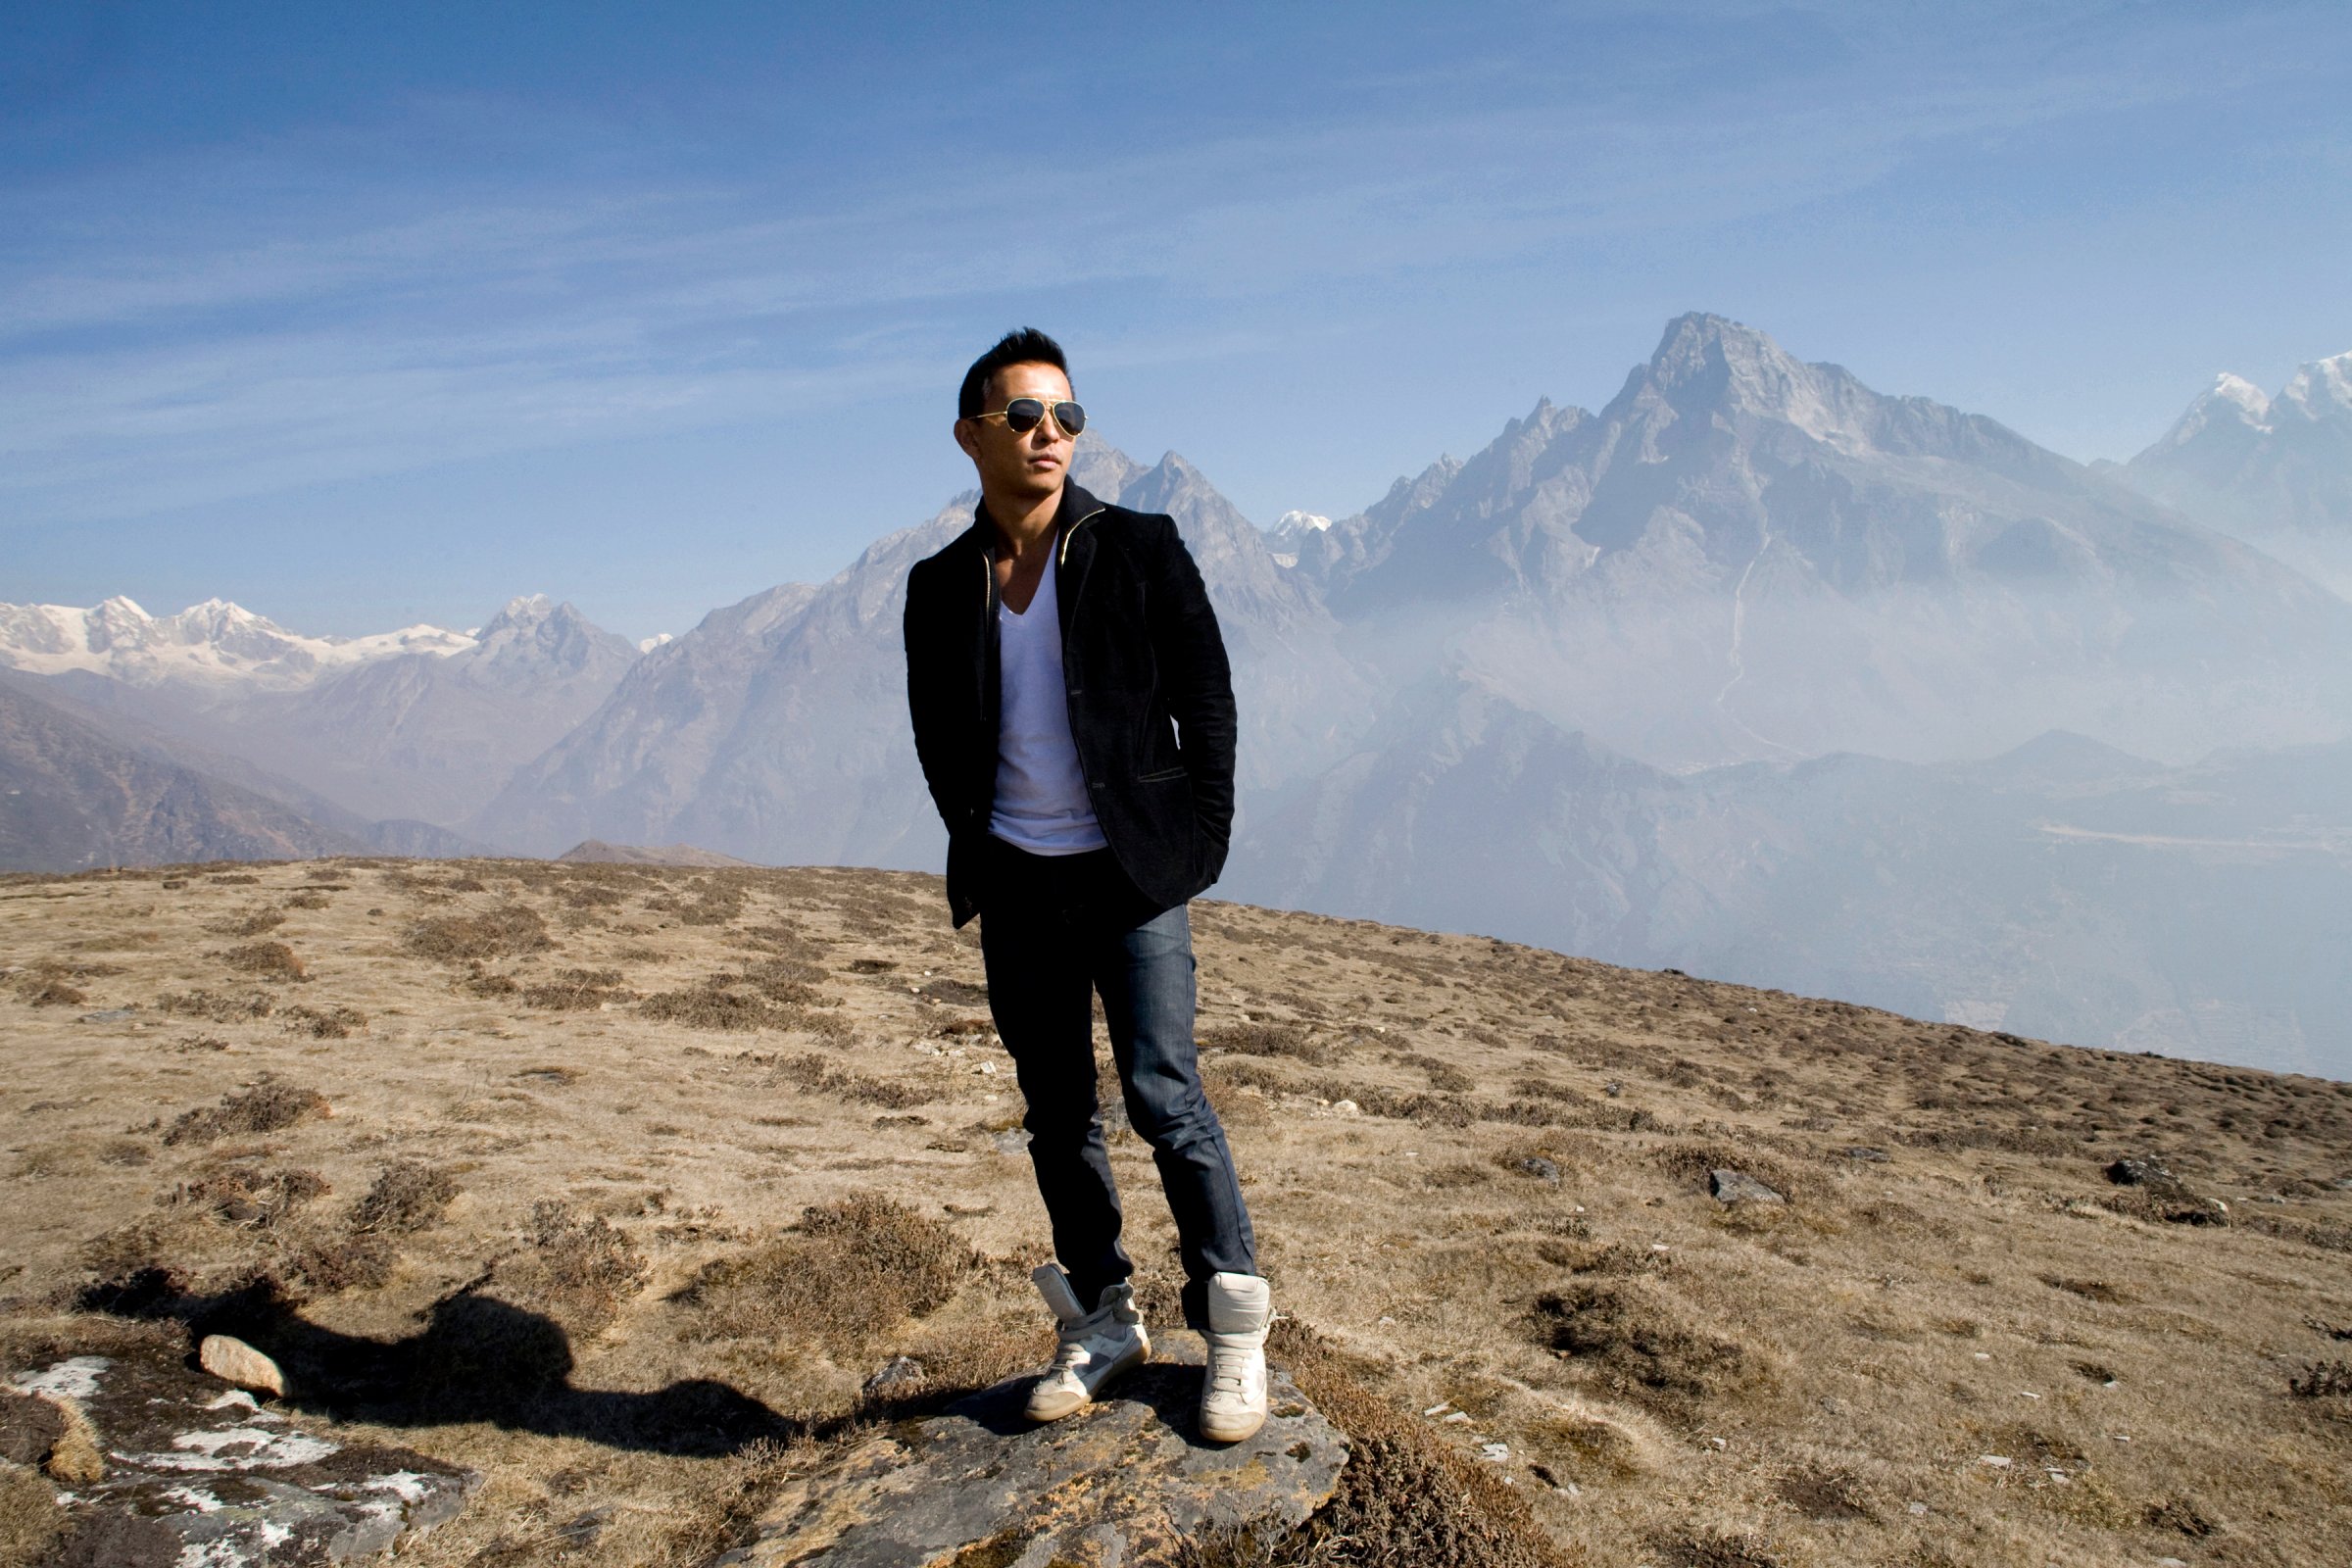 Nepali fashion designer Prabal Gurun poses at the foot of Kondge mountain at more than 13,000 feet above sea level, with the Khumbu valley behind him on April 7, 2010.